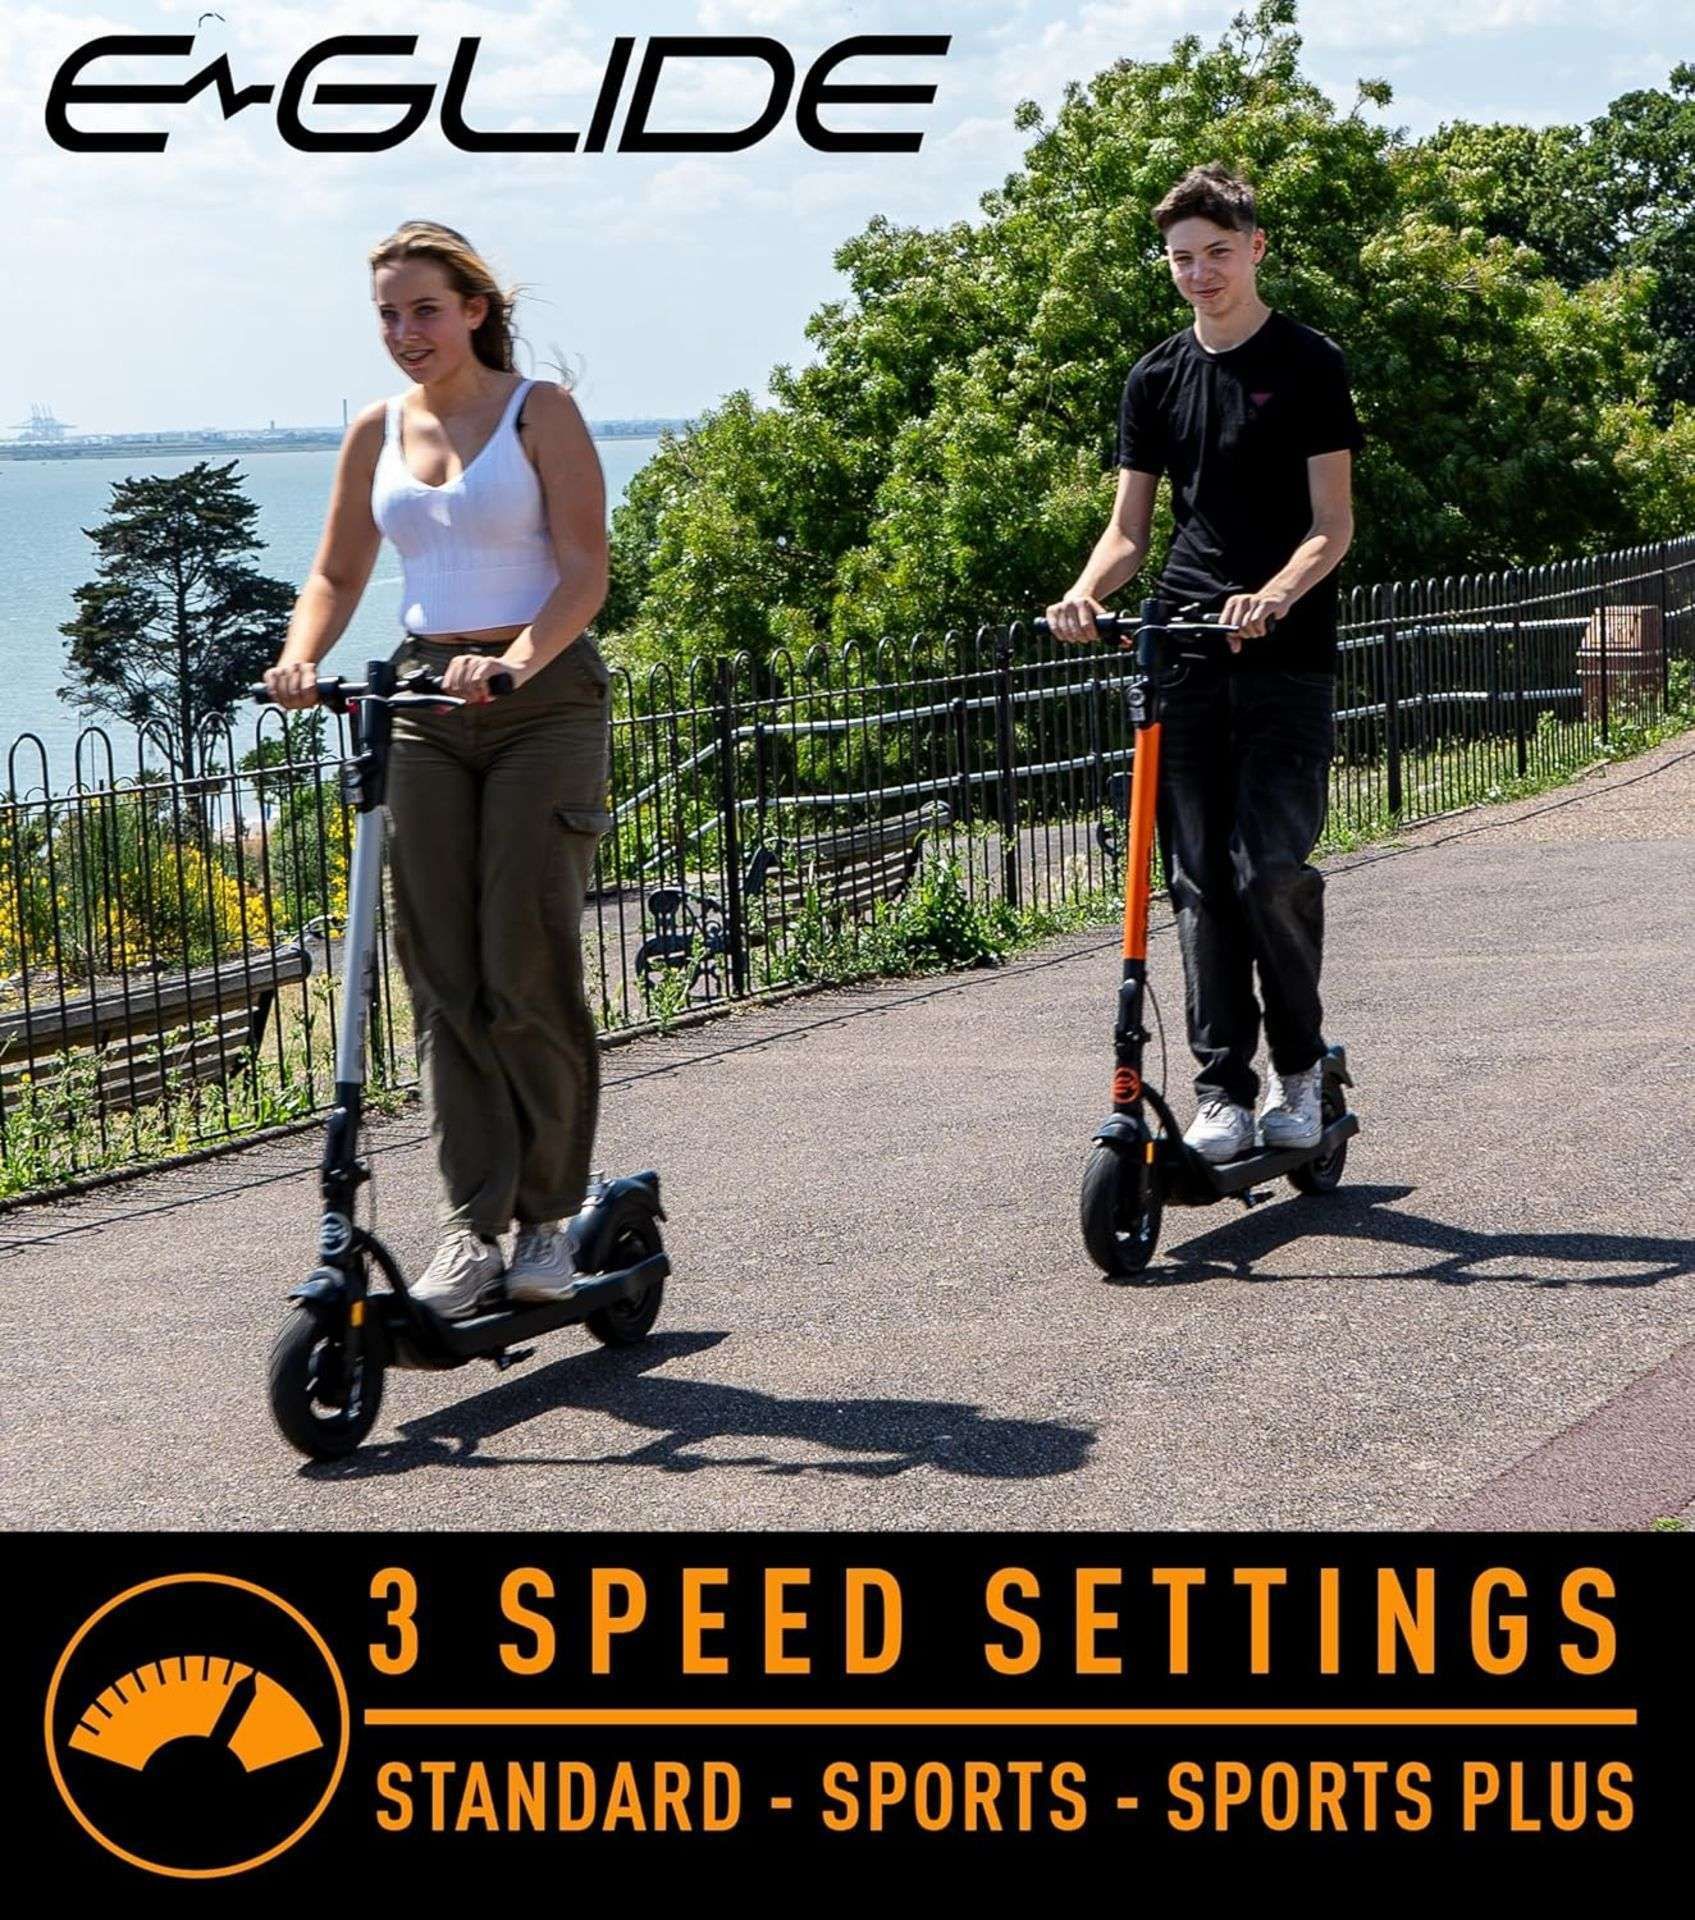 Brand New E-Glide V2 Electric Scooter Orange and Black RRP £599, Introducing a sleek and efficient - Image 5 of 5